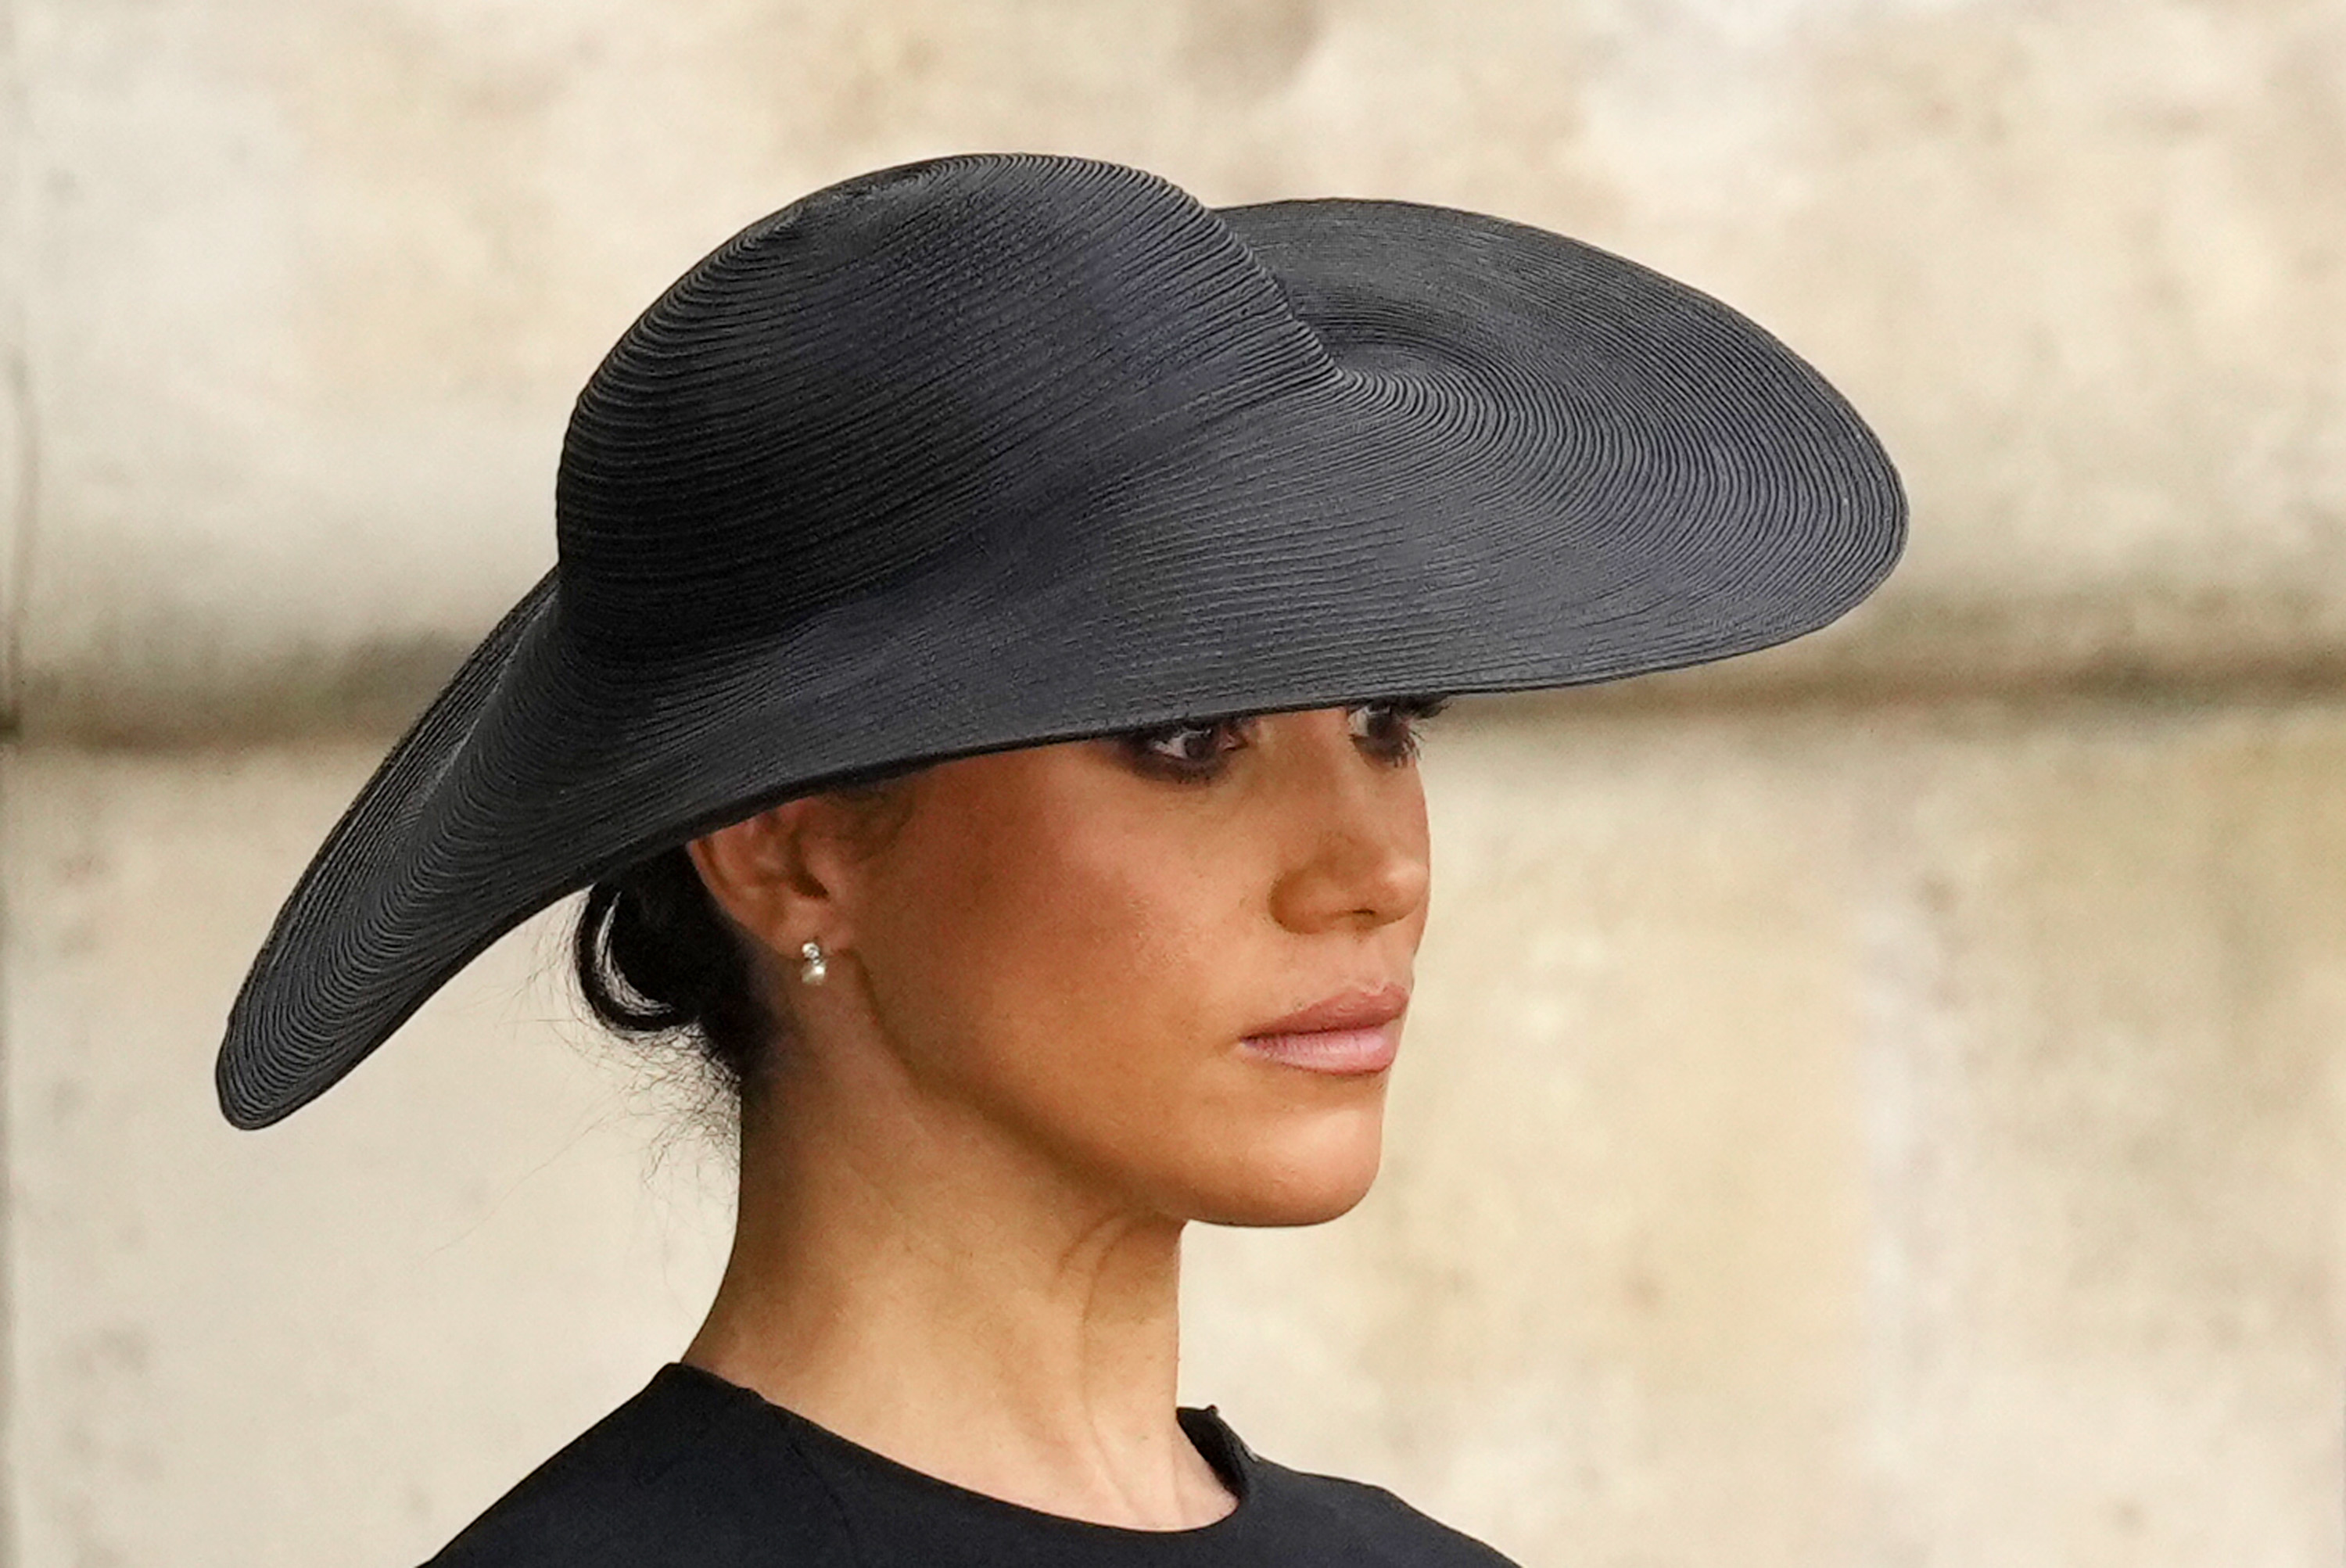 Meghan Markle during The State Funeral of Queen Elizabeth II on September 19, 2022 in London, England | Source: Getty Images